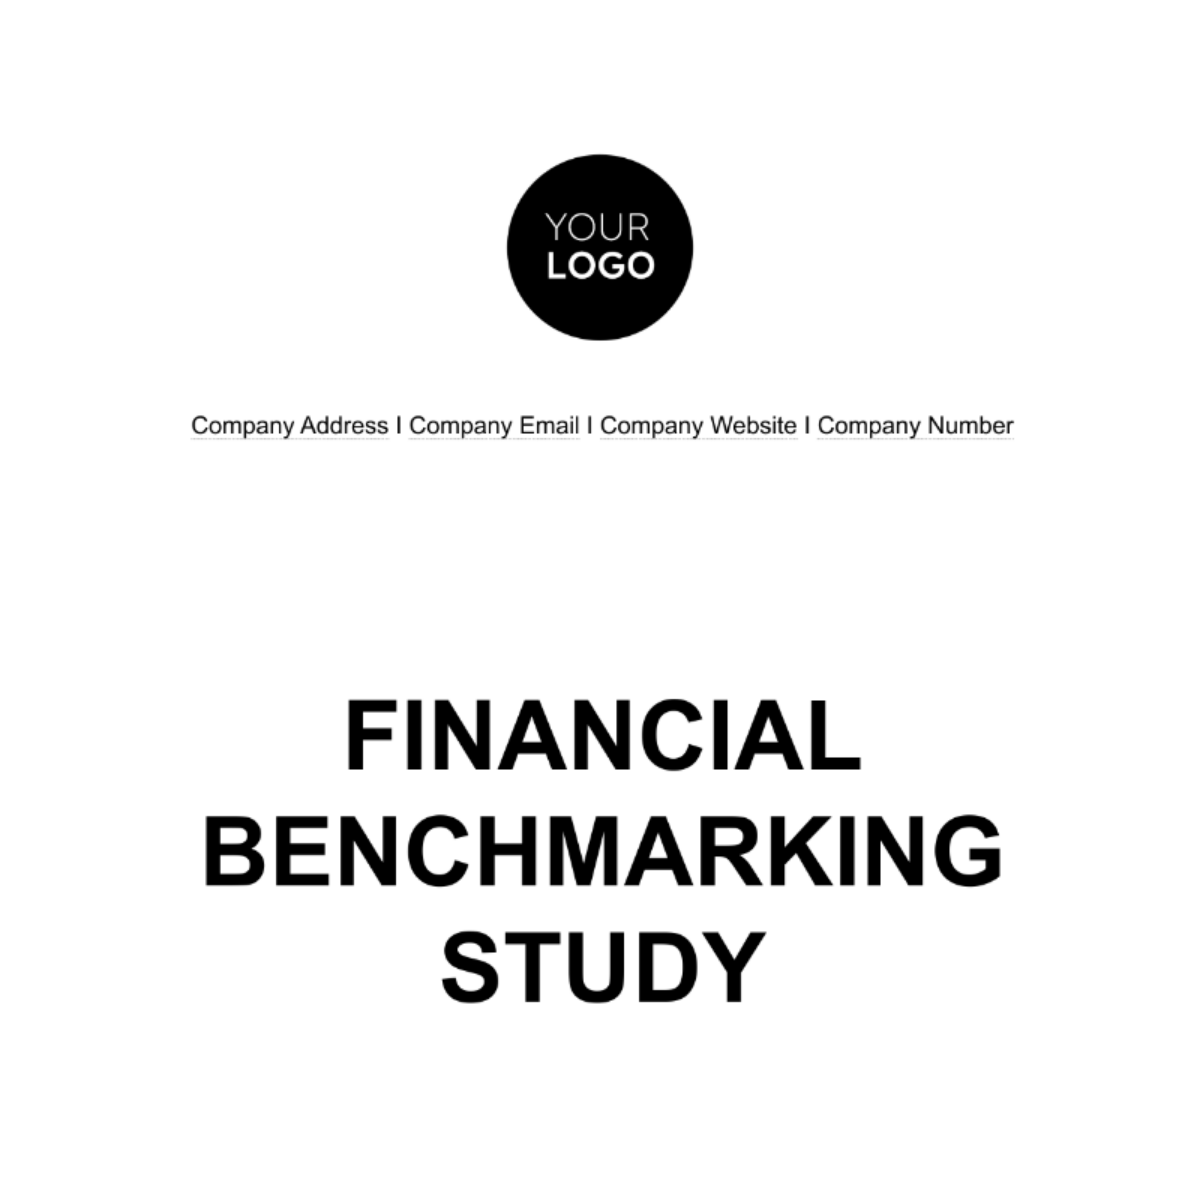 Financial Benchmarking Study Template